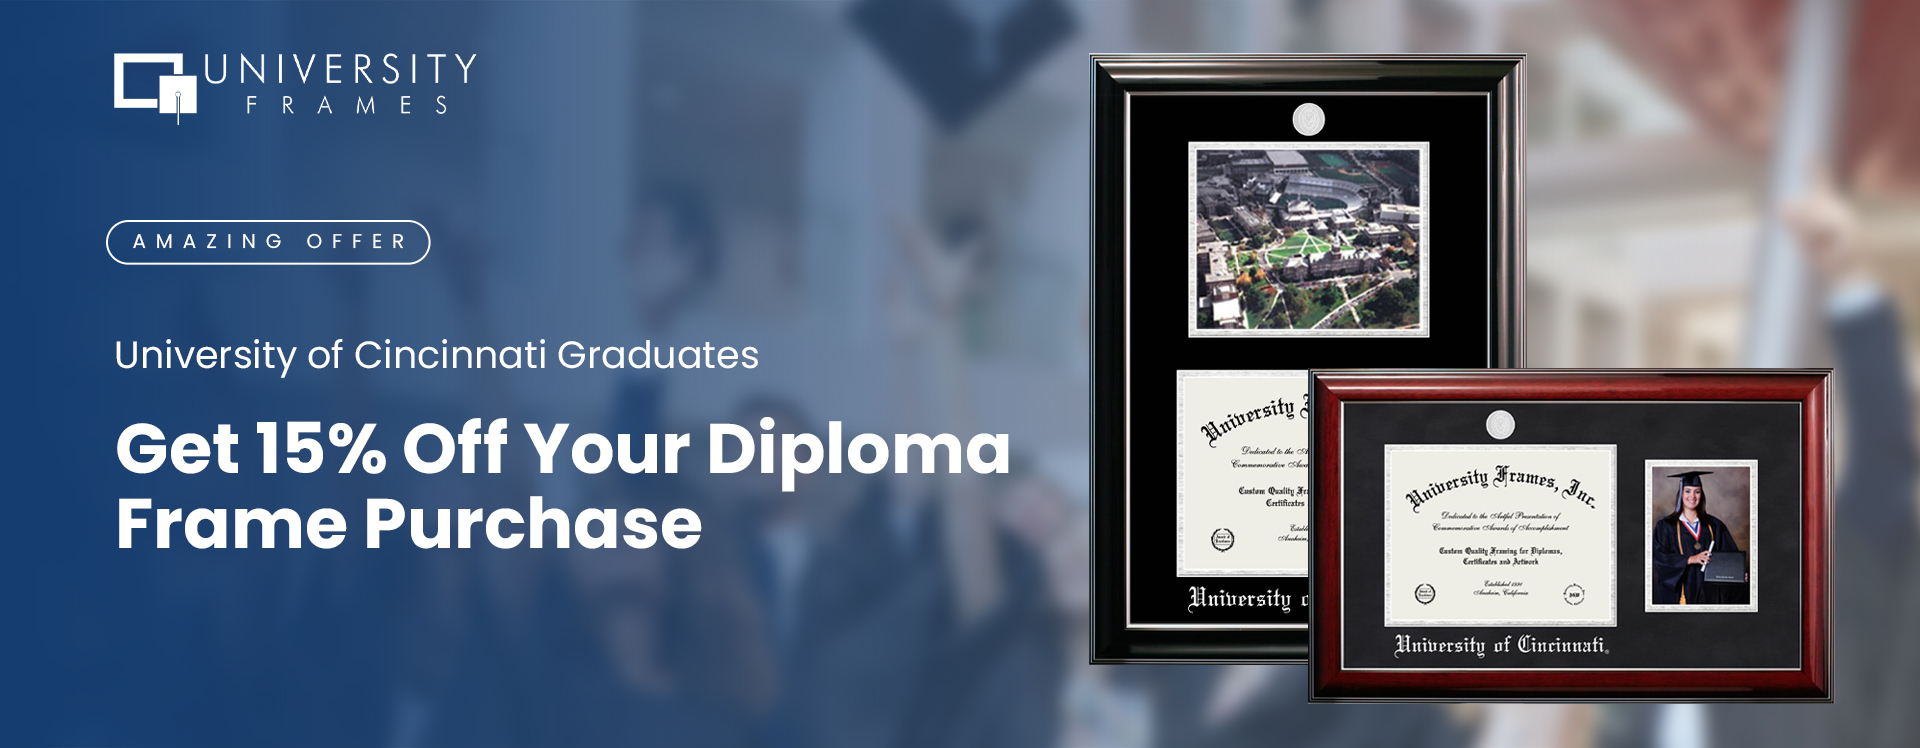 Amazing Offer for the University of Cincinnati Graduates - Get 15% Off Your Diploma Frame Purchase